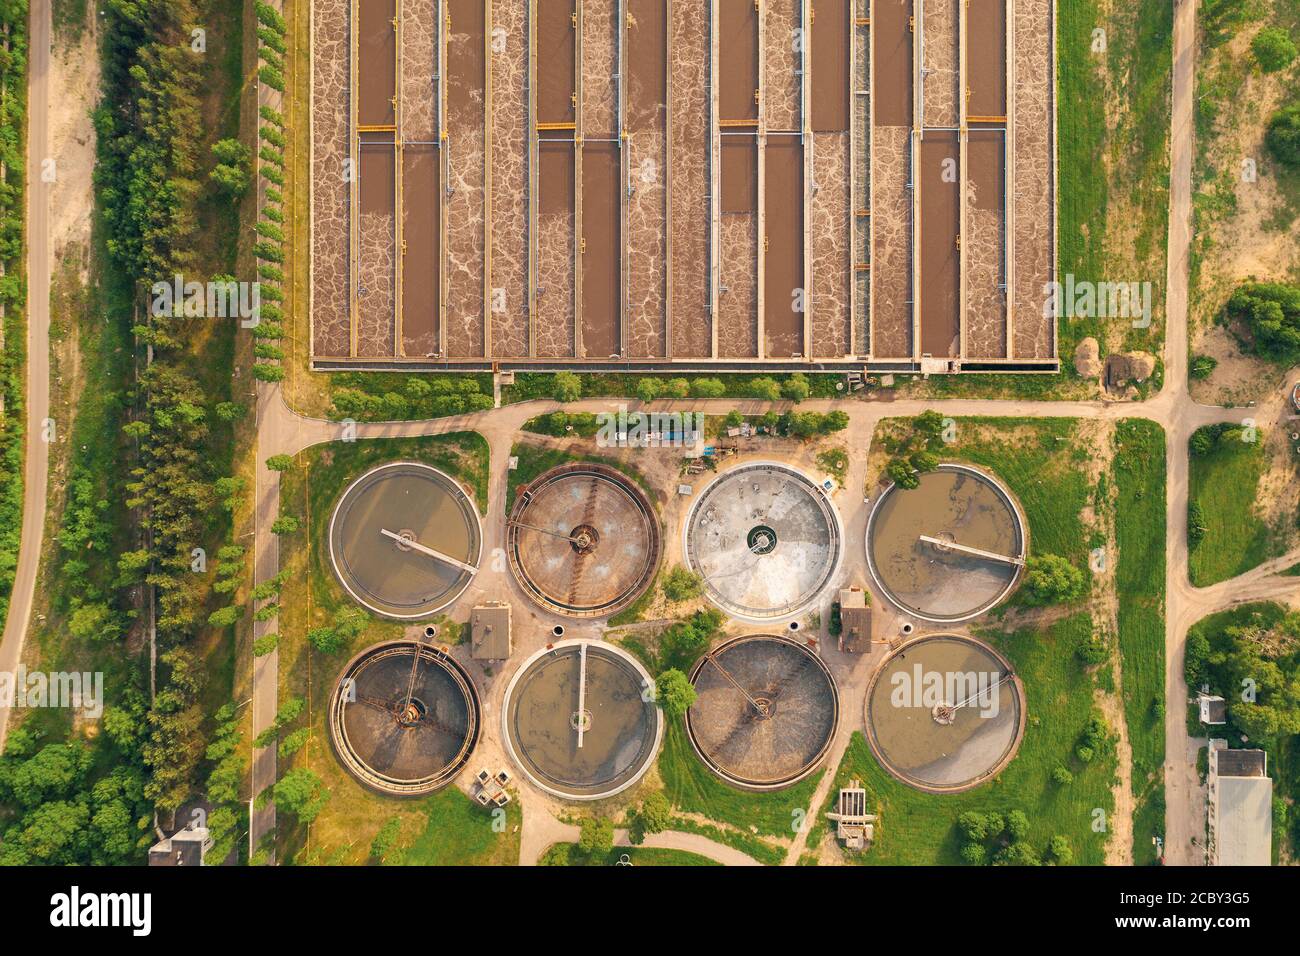 Wastewater treatment plant, filtration of dirty or sewage water, aerial view. Stock Photo